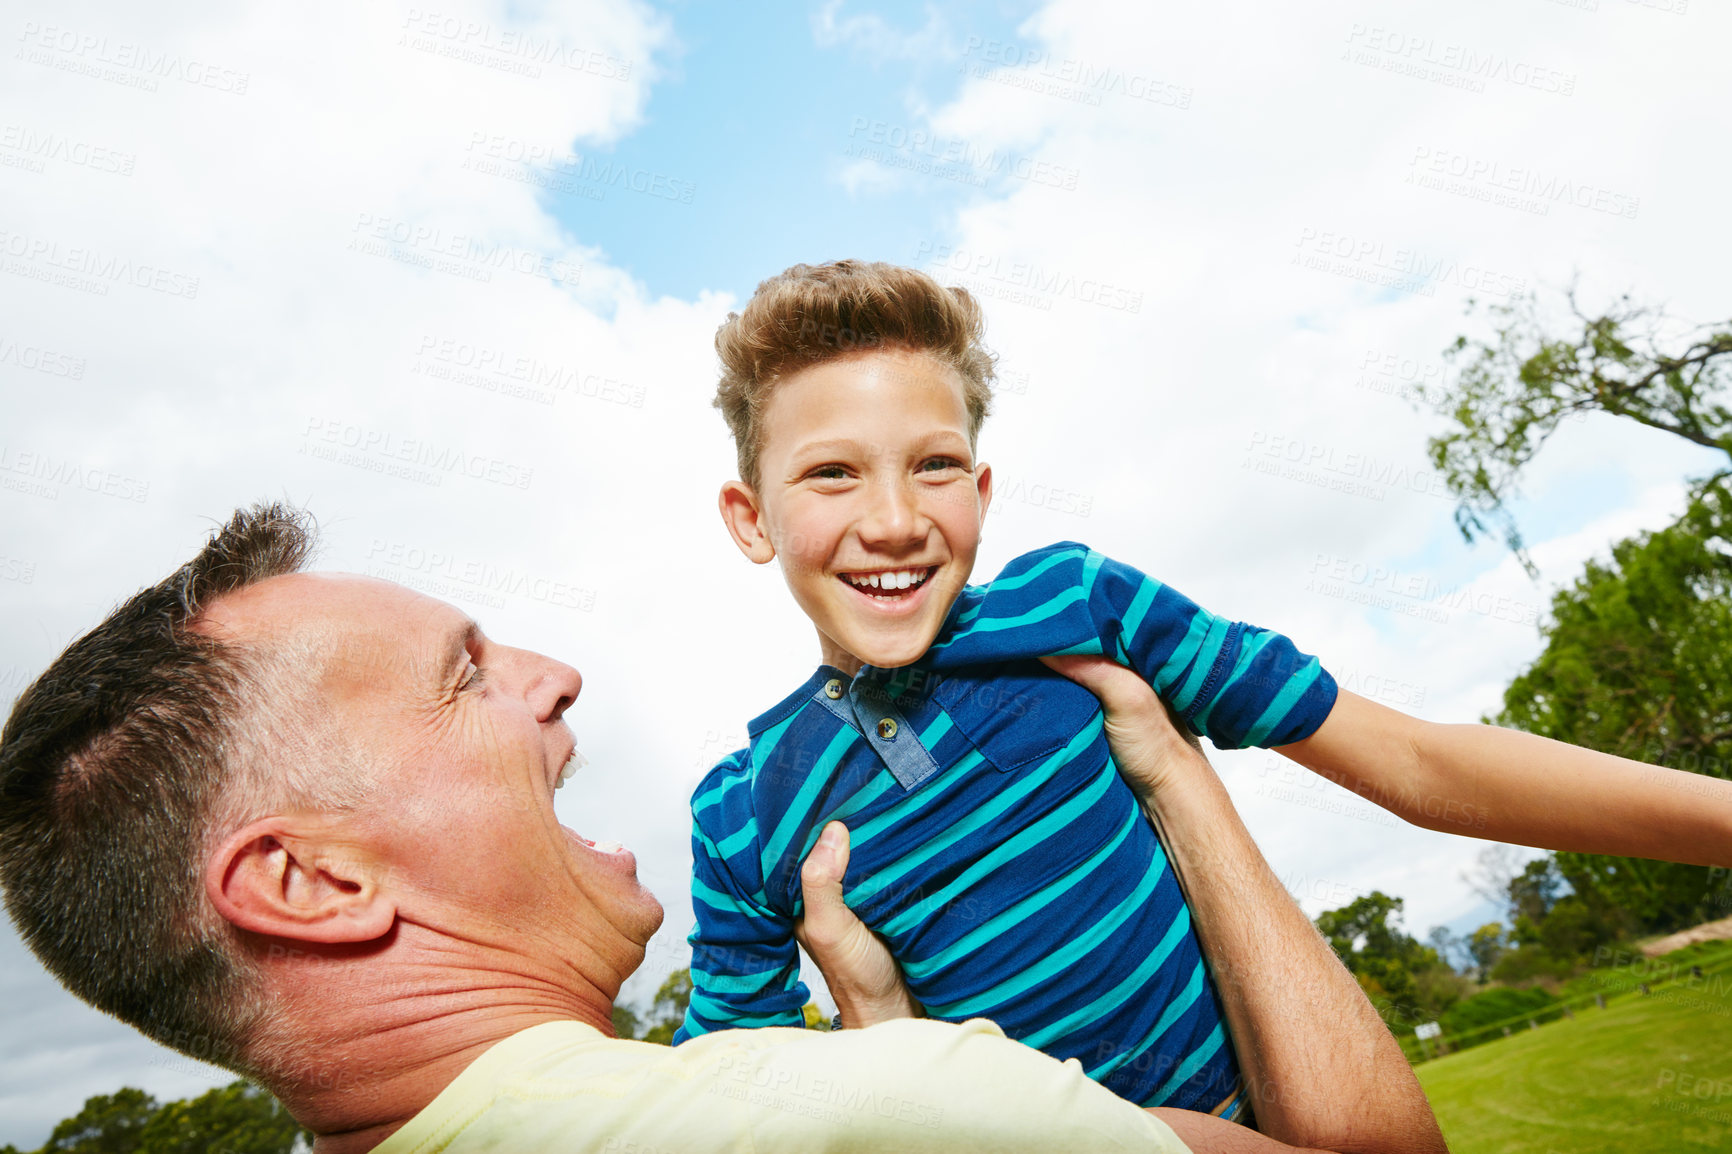 Buy stock photo Shot of a dad standing outside holding his son up in the air